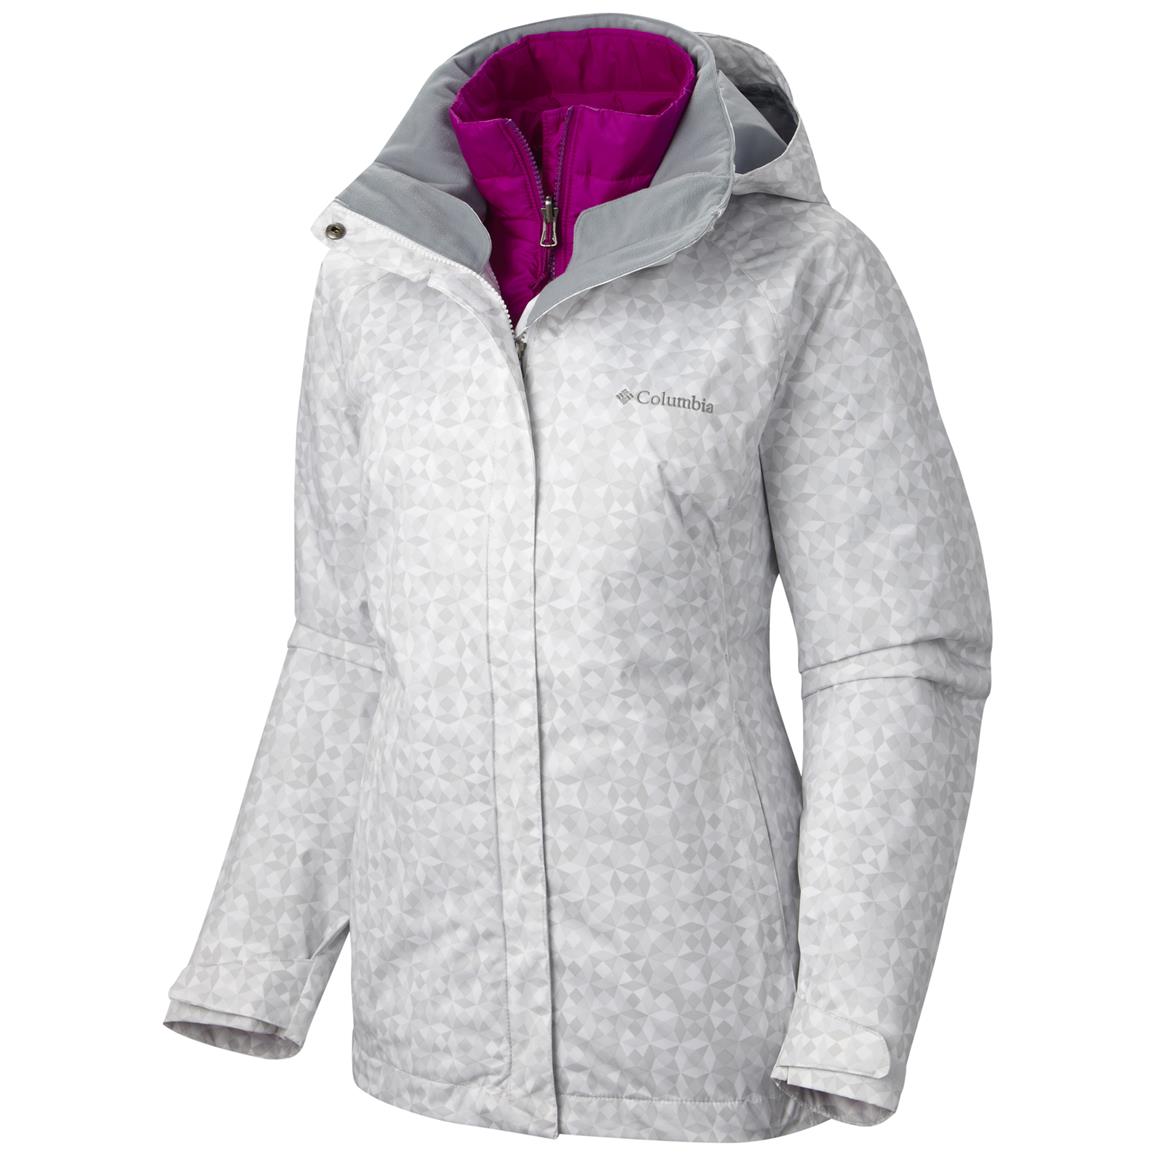 Women's Columbia Outer West Jacket - 636972, Insulated Jackets & Coats at Sportsman's Guide